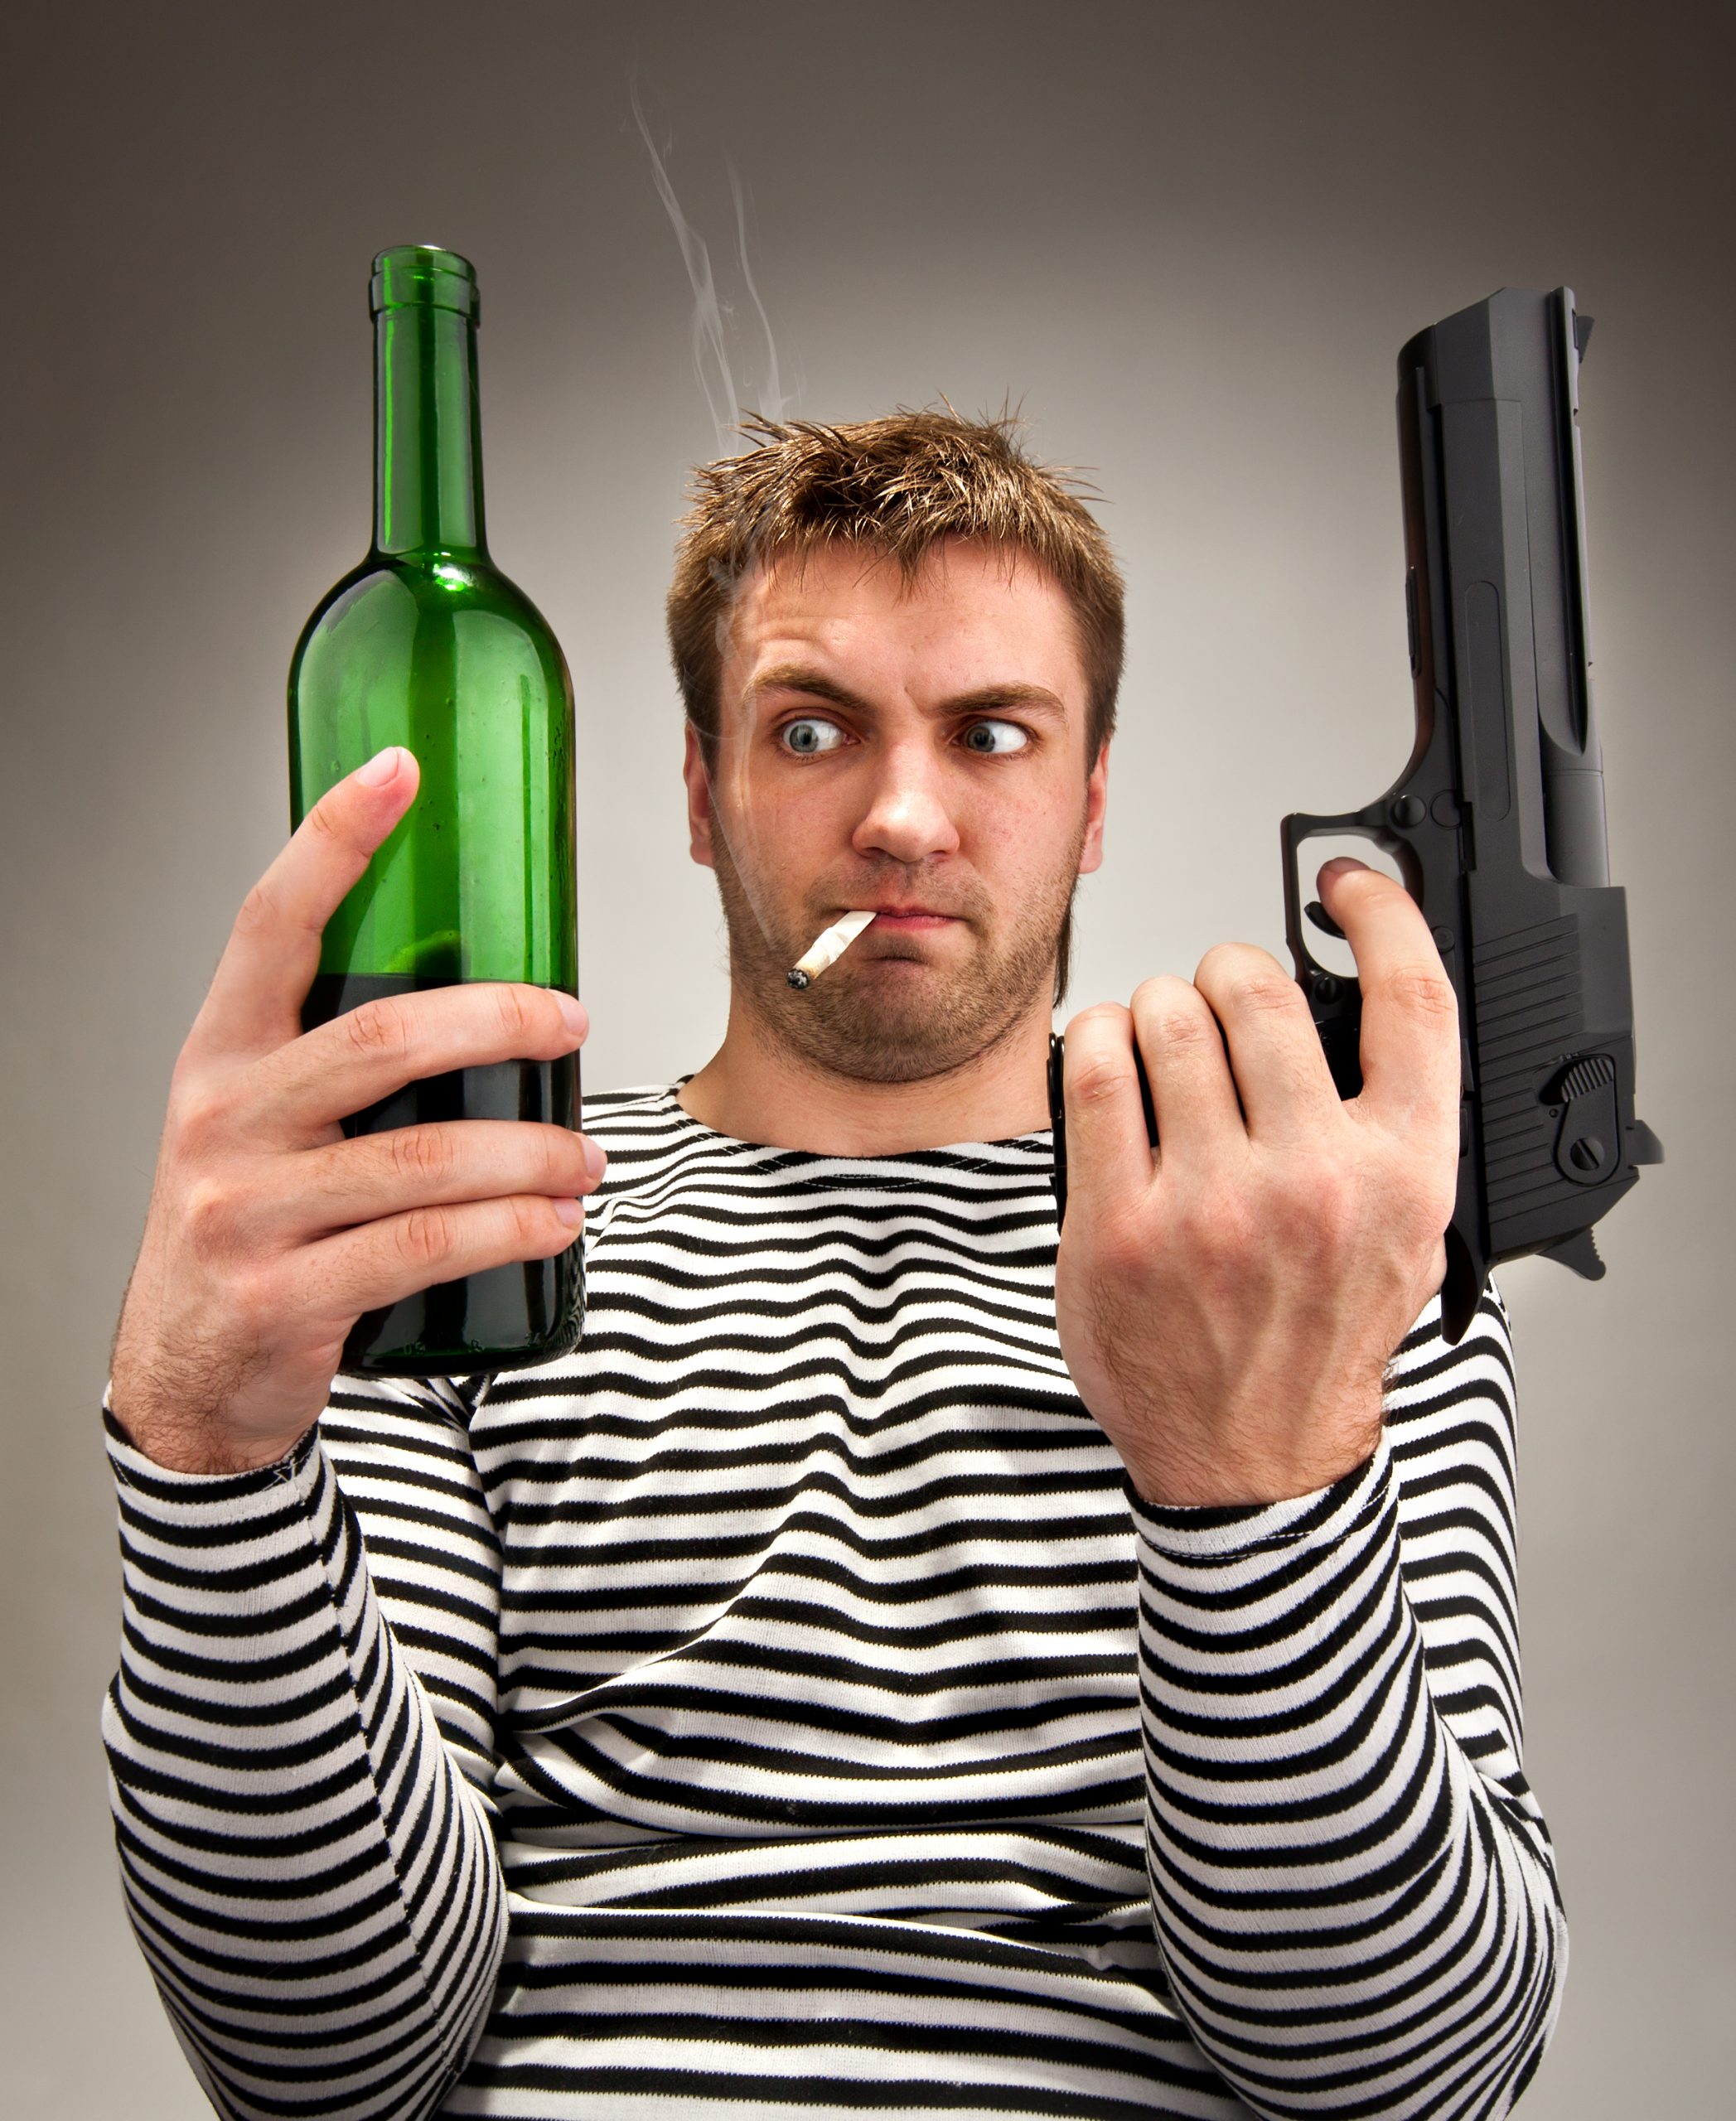 Carrying While Drunk – JUST SAY NO!